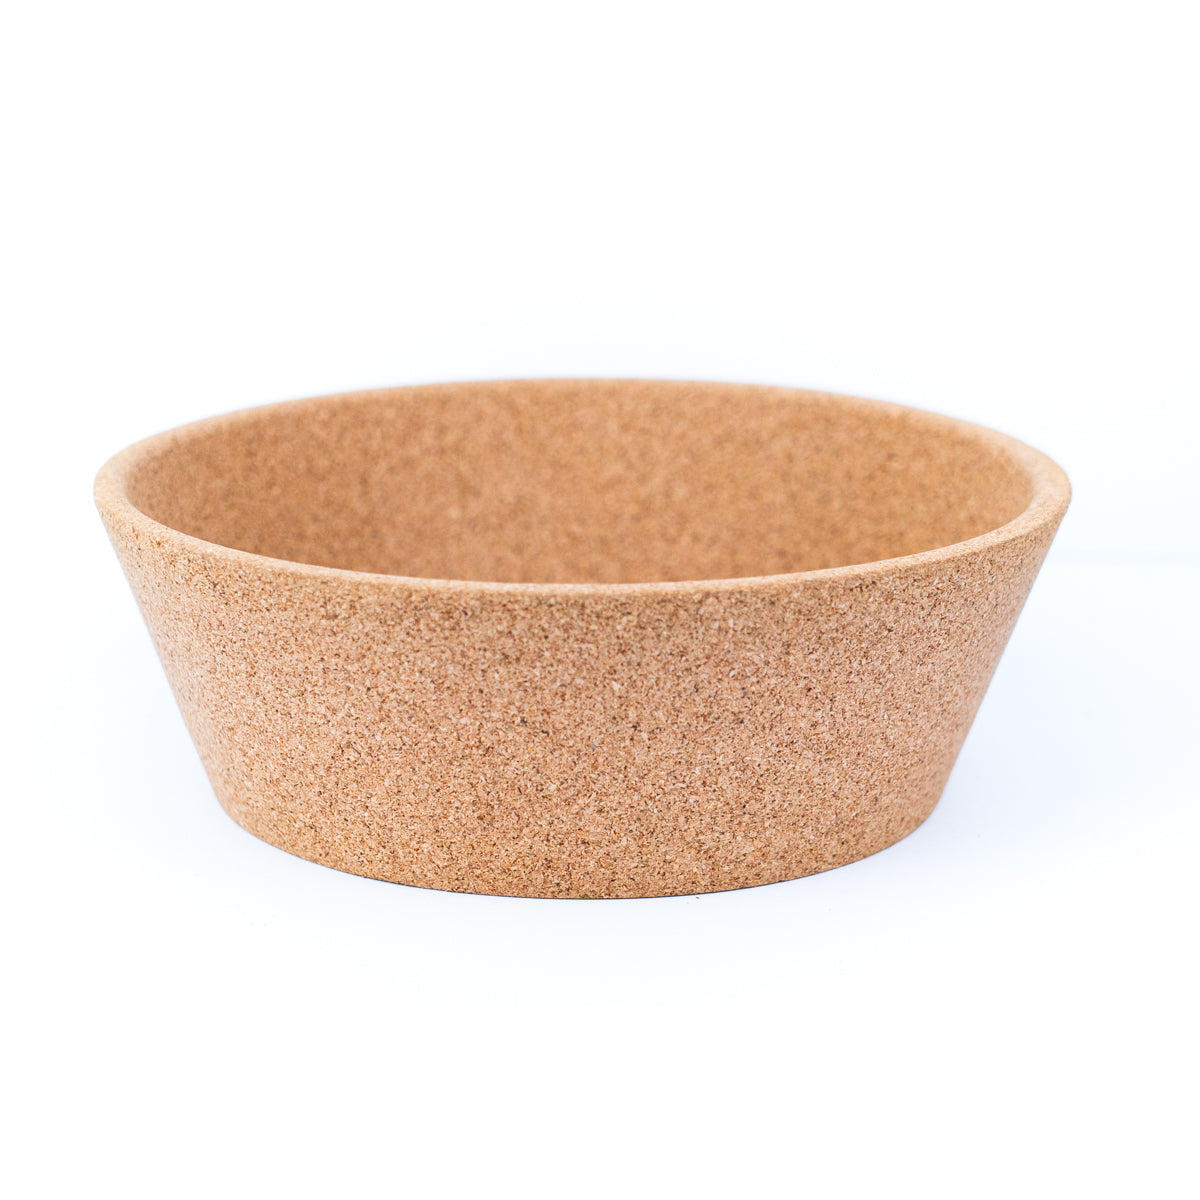 Cork Snack Bowl | THE CORK COLLECTION